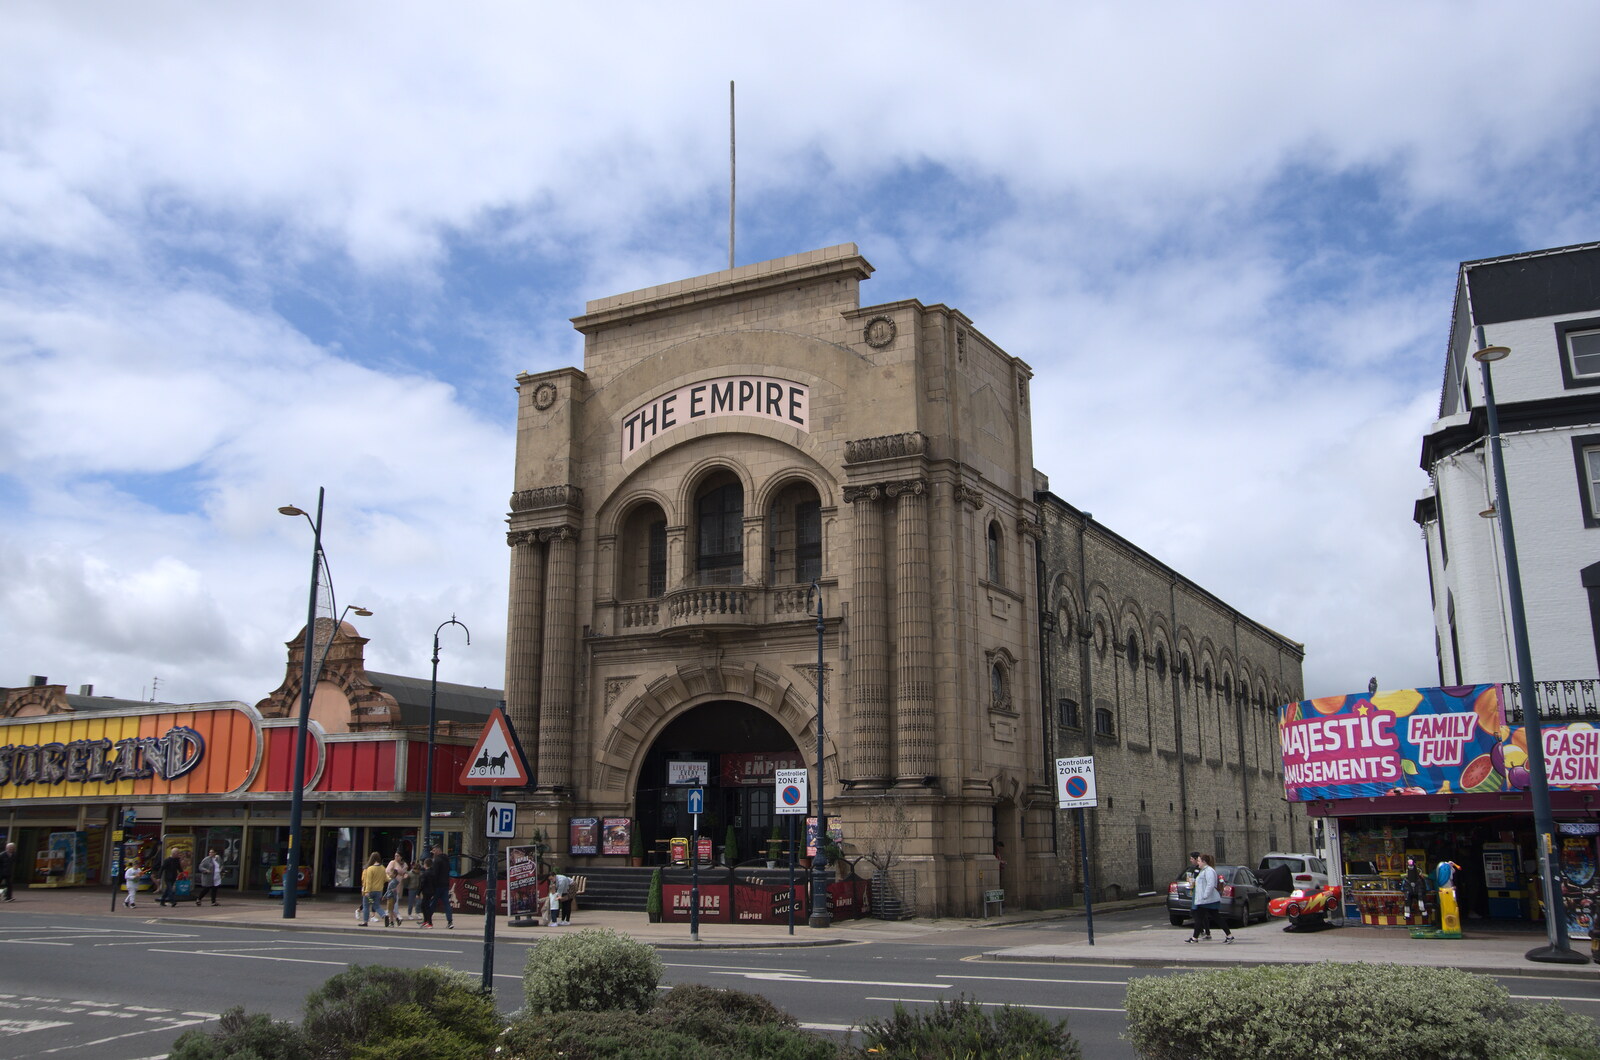 The Empire theater from Faded Seaside Glamour: A Weekend in Great Yarmouth, Norfolk - 29th May 2022